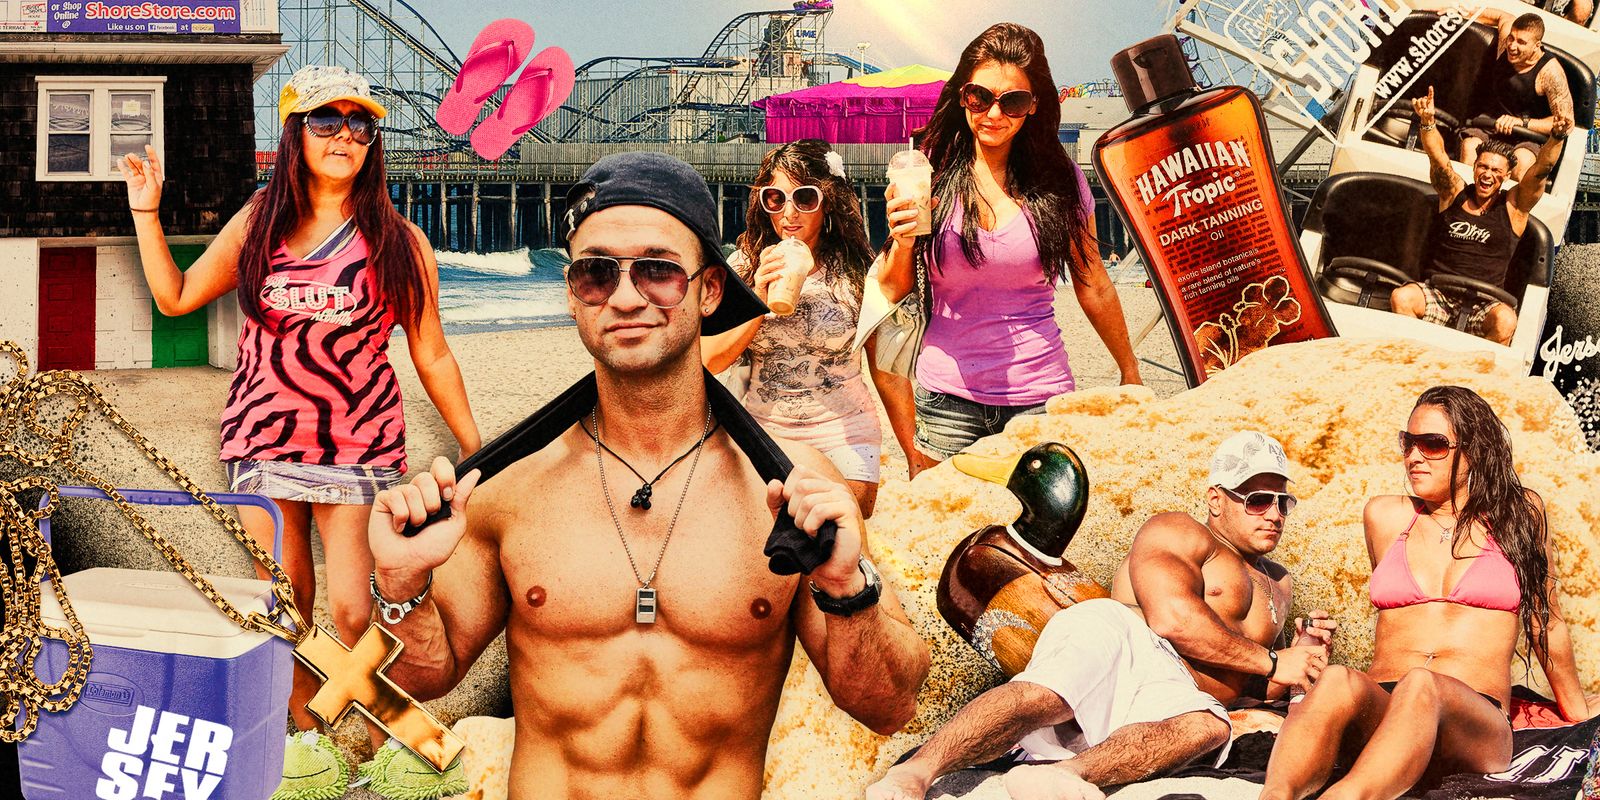 Jersey Shore: The Oral History of MTV's Wildest Reality Show